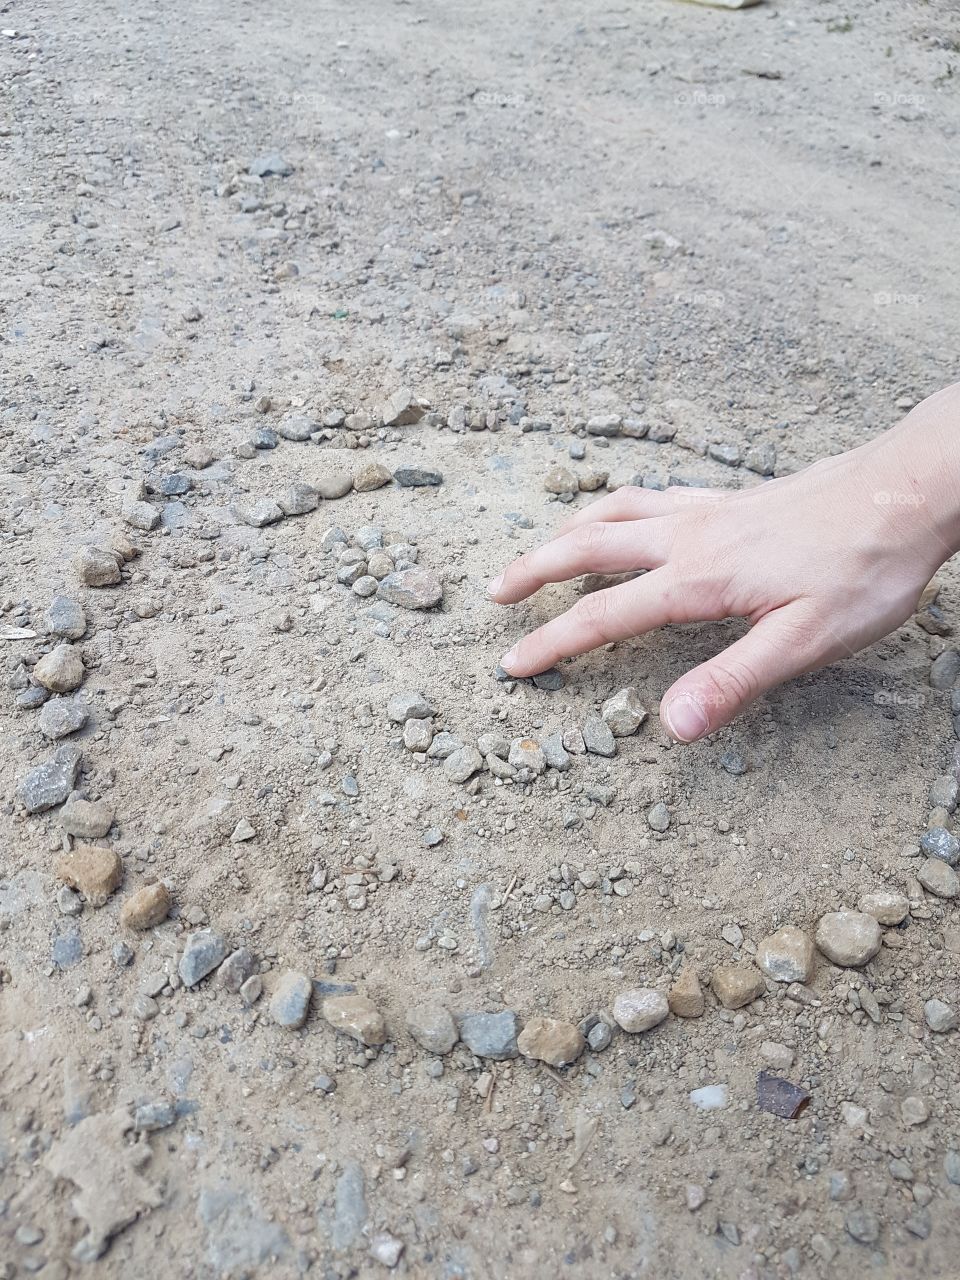 kids hand on the ground with rocks